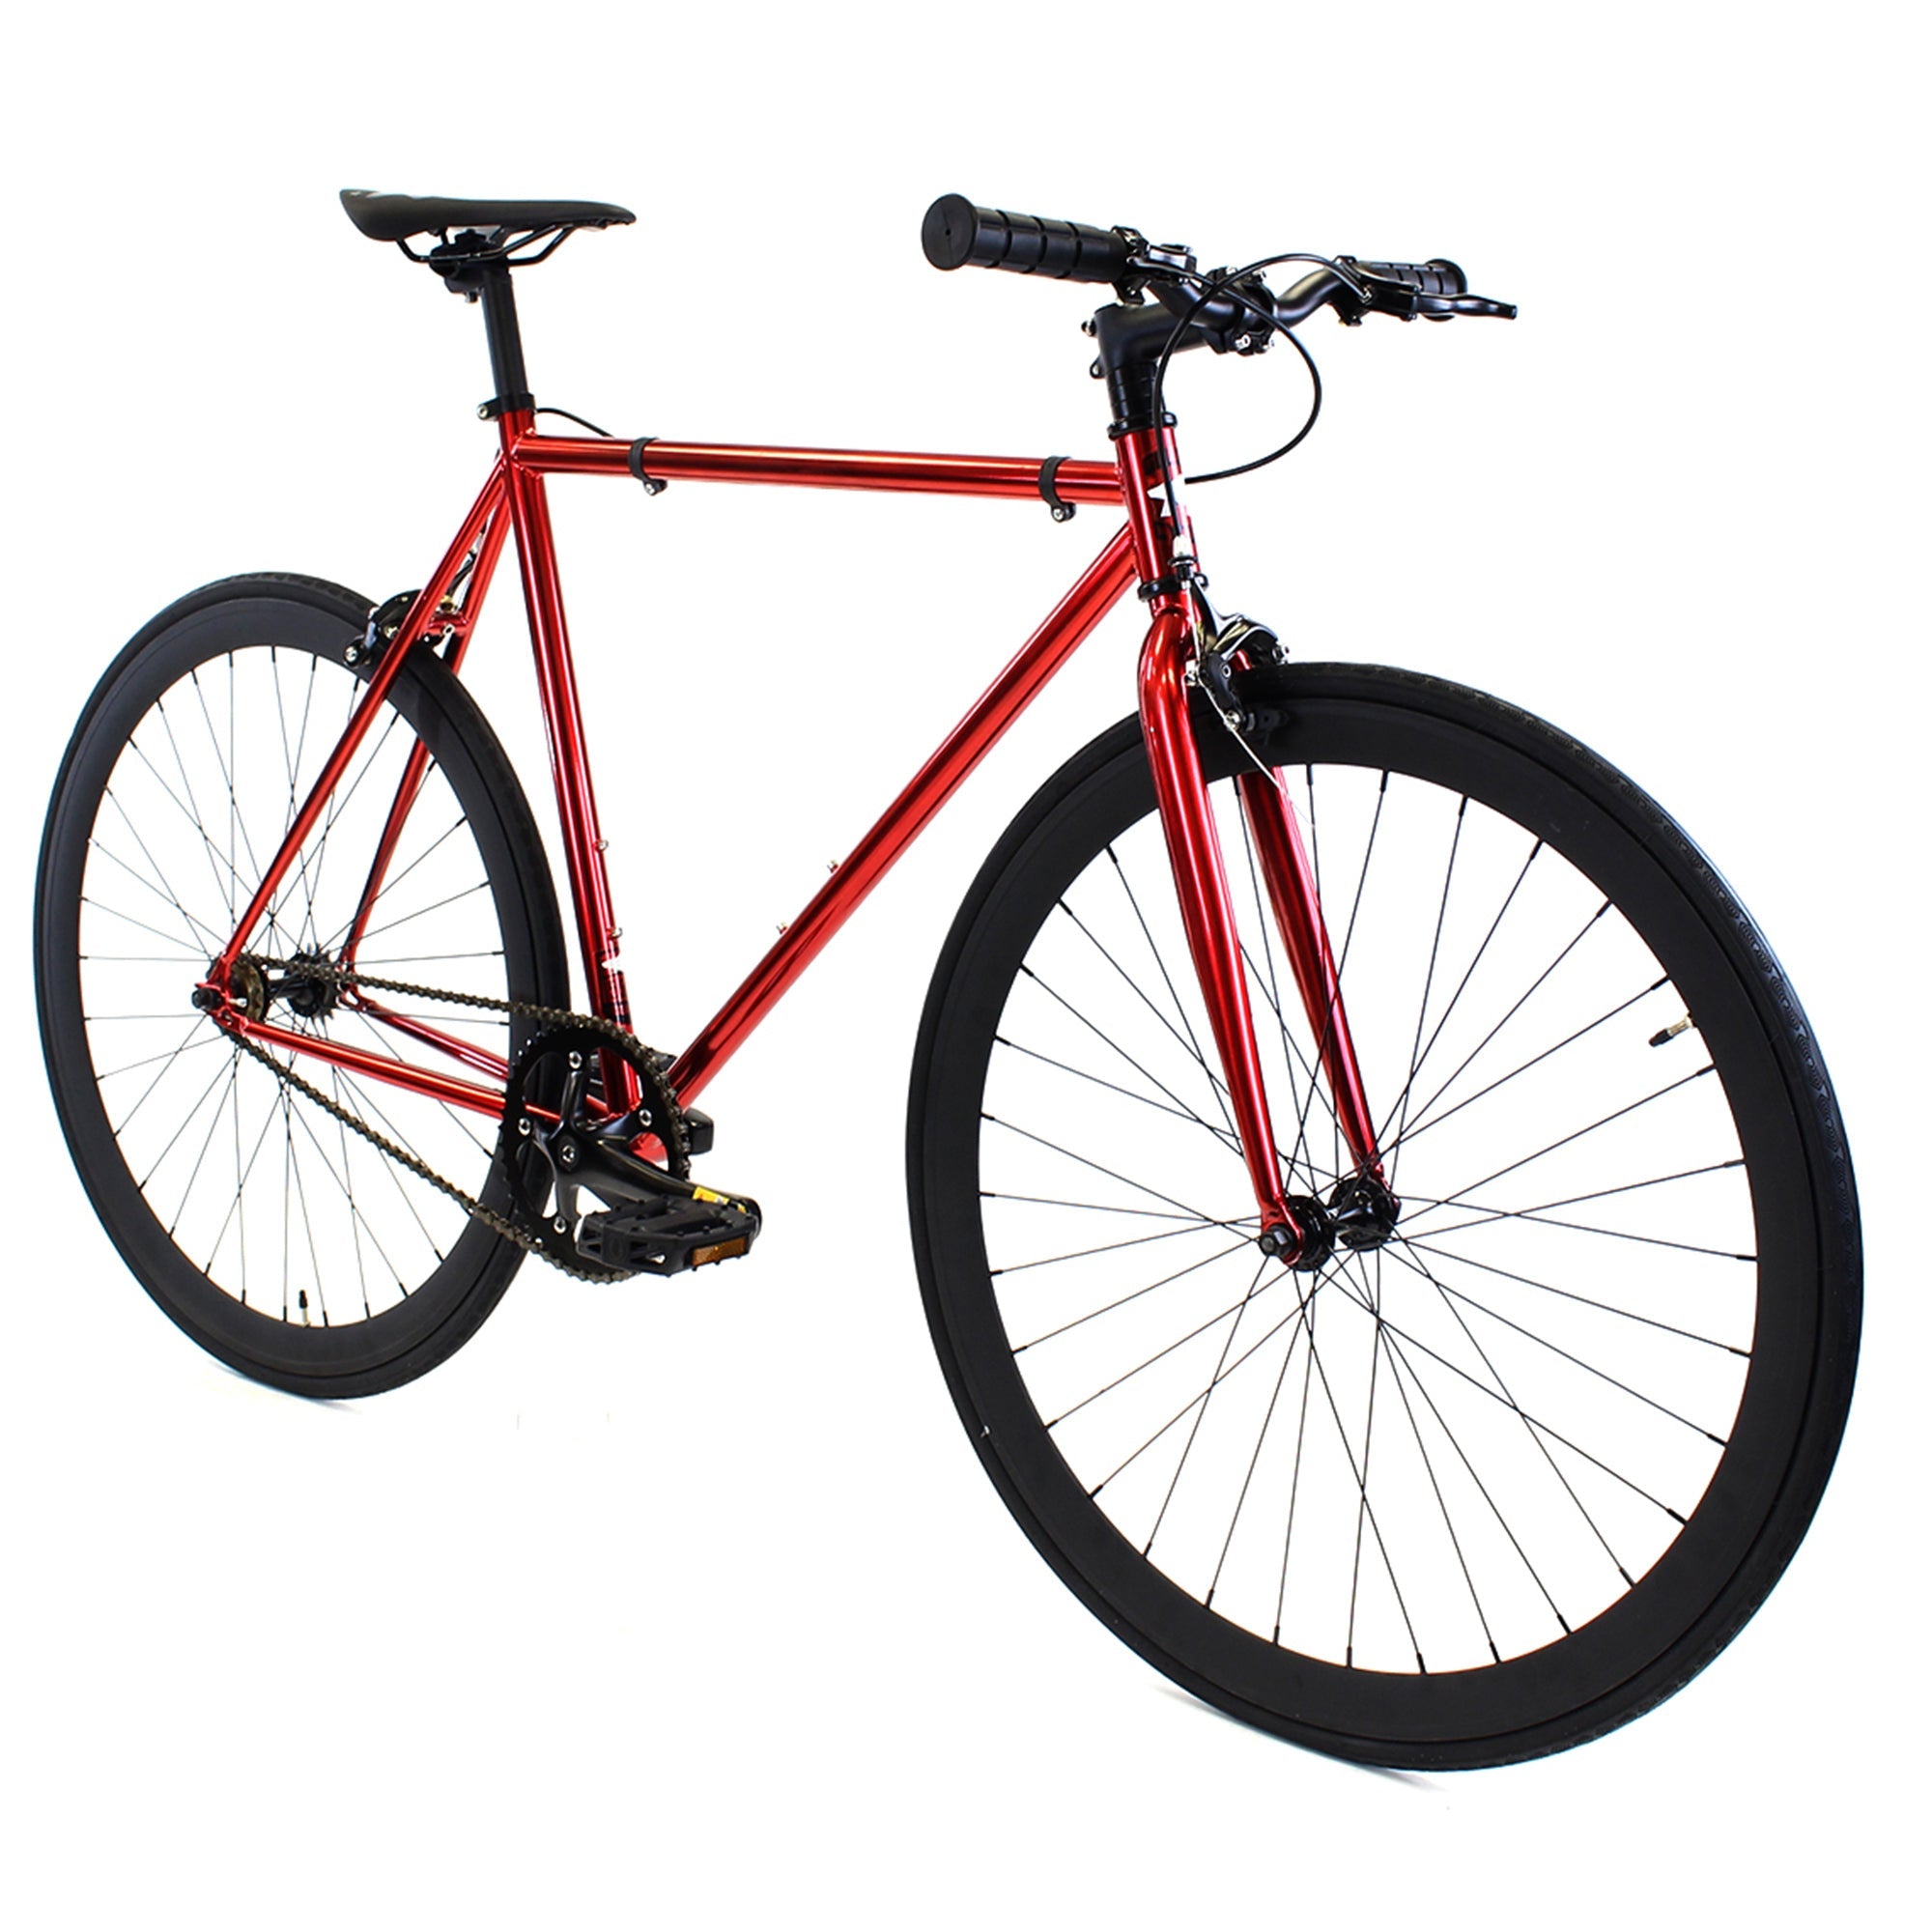 Golden Cycles Redrum Fixie Single Speed City Bike, Gloss Red/Black, GC-RDR - Upzy.com